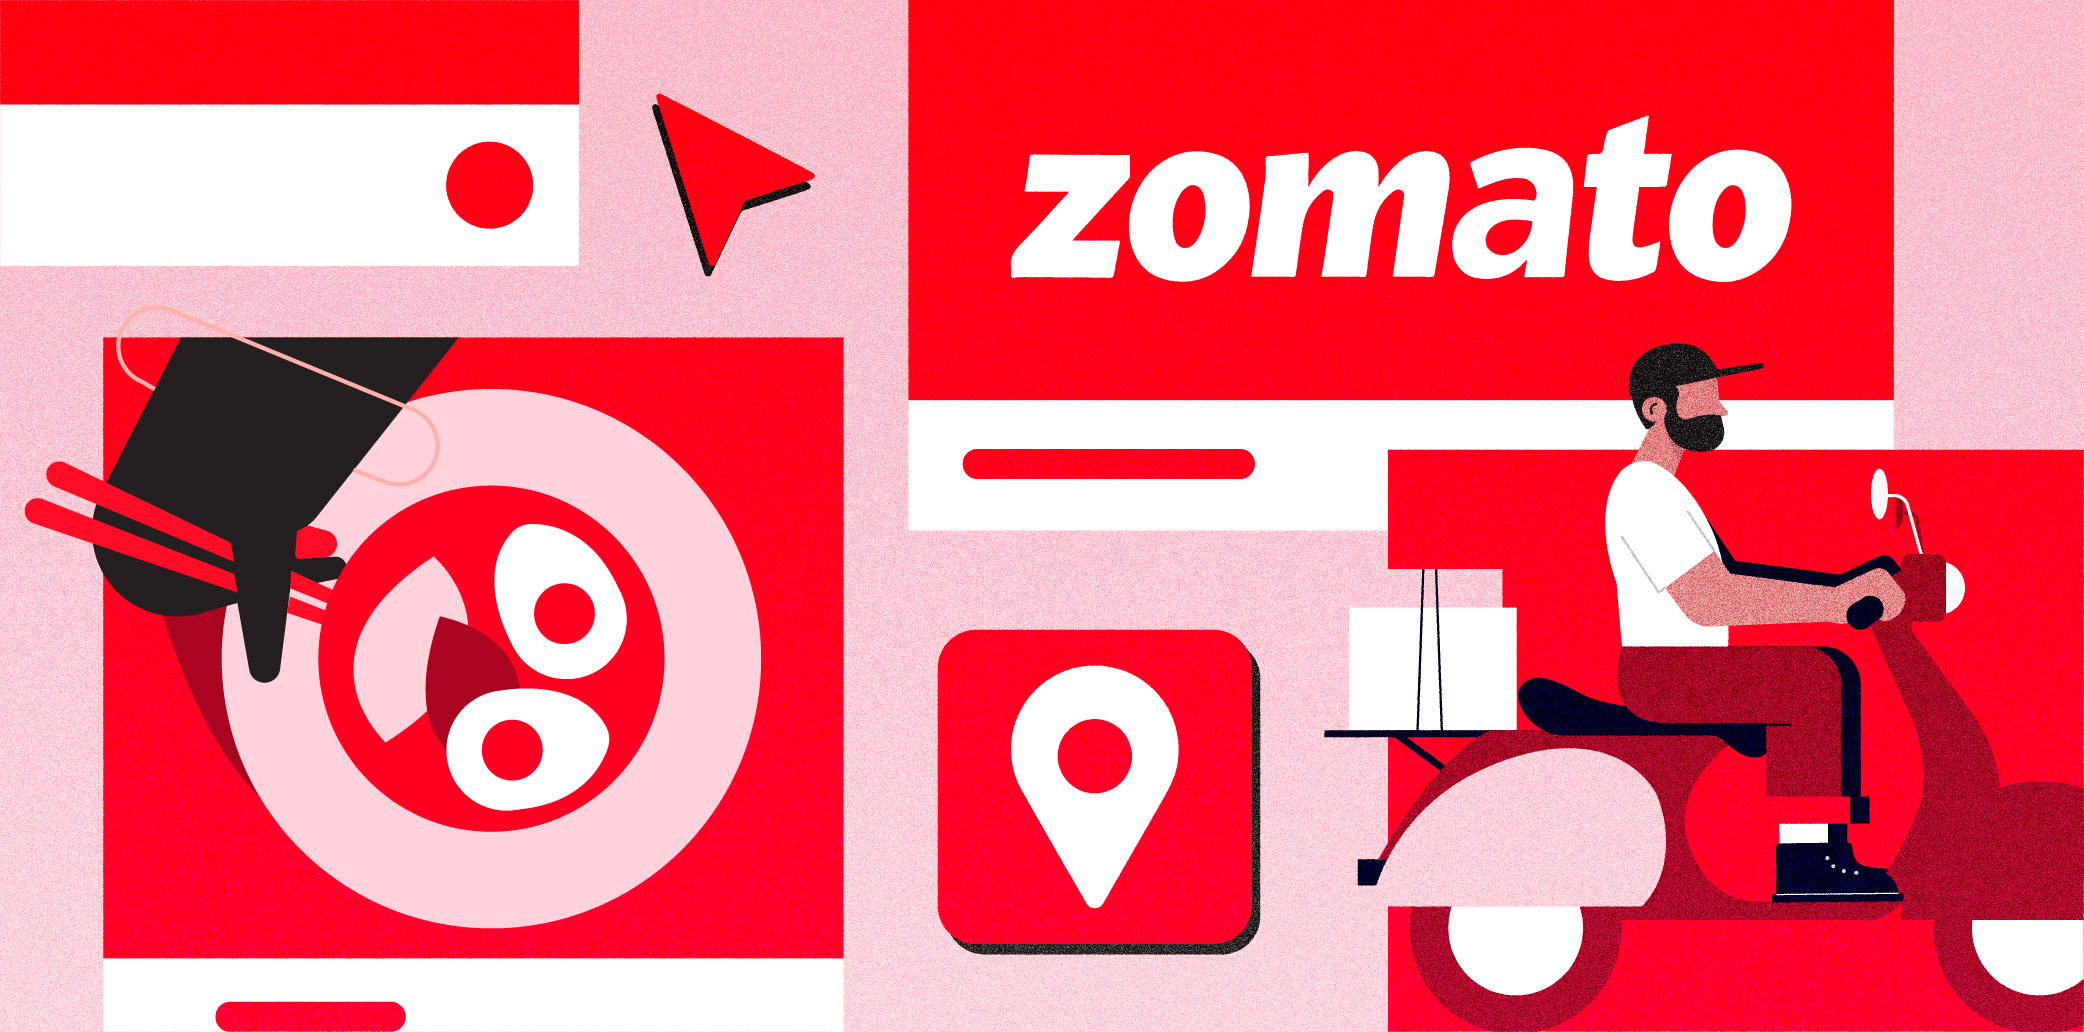 Food delivery giant Zomato scraps grocery play again as India’s quick commerce trend heats up